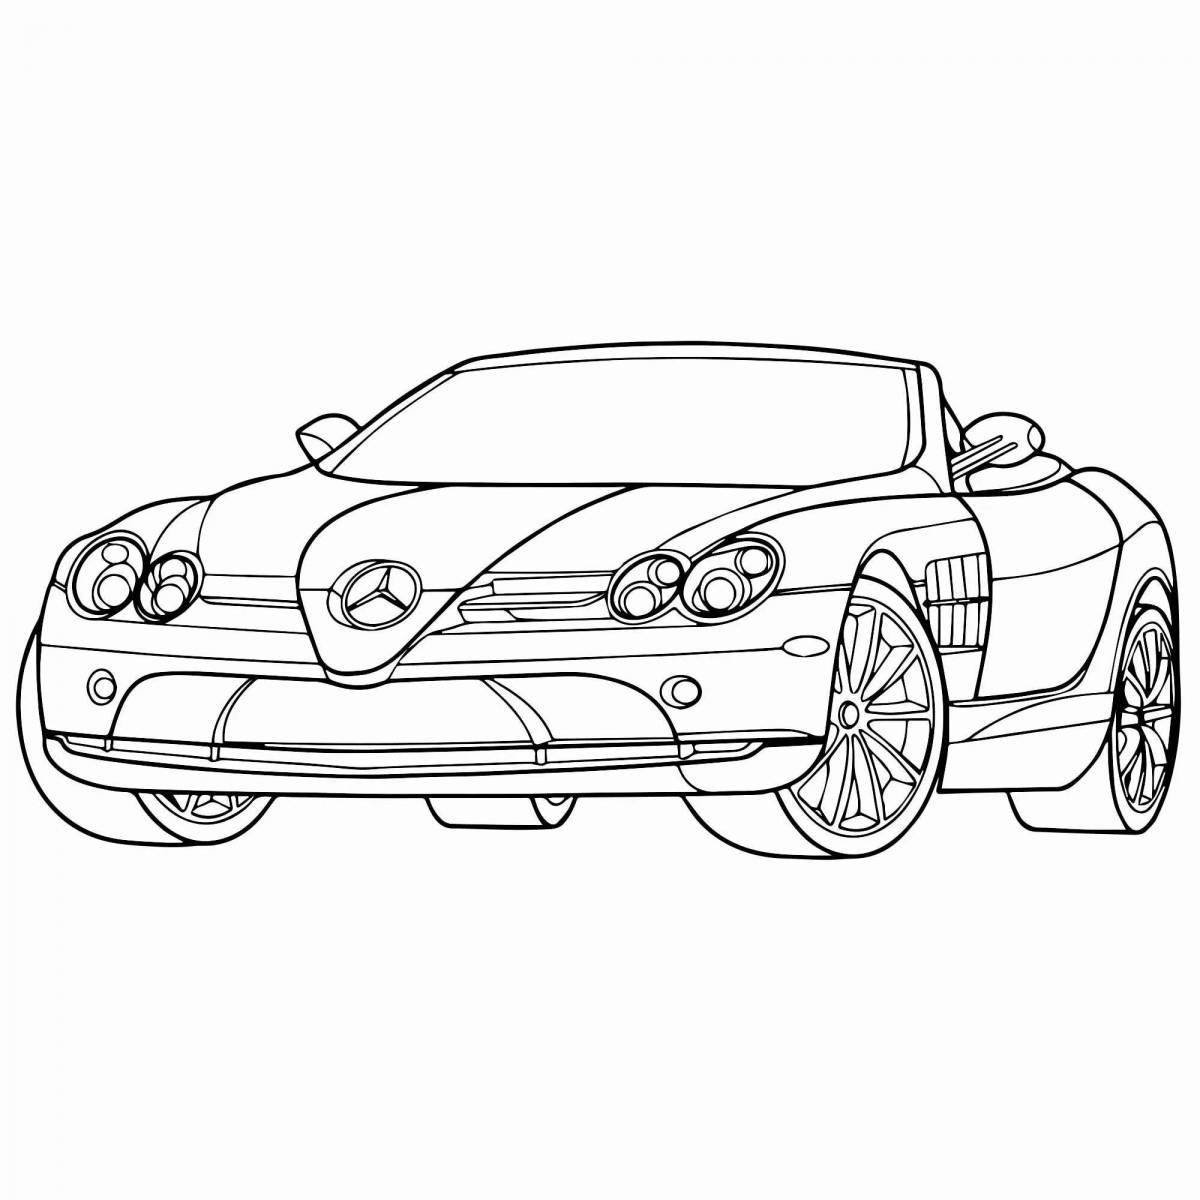 Coloring animated car with eyes